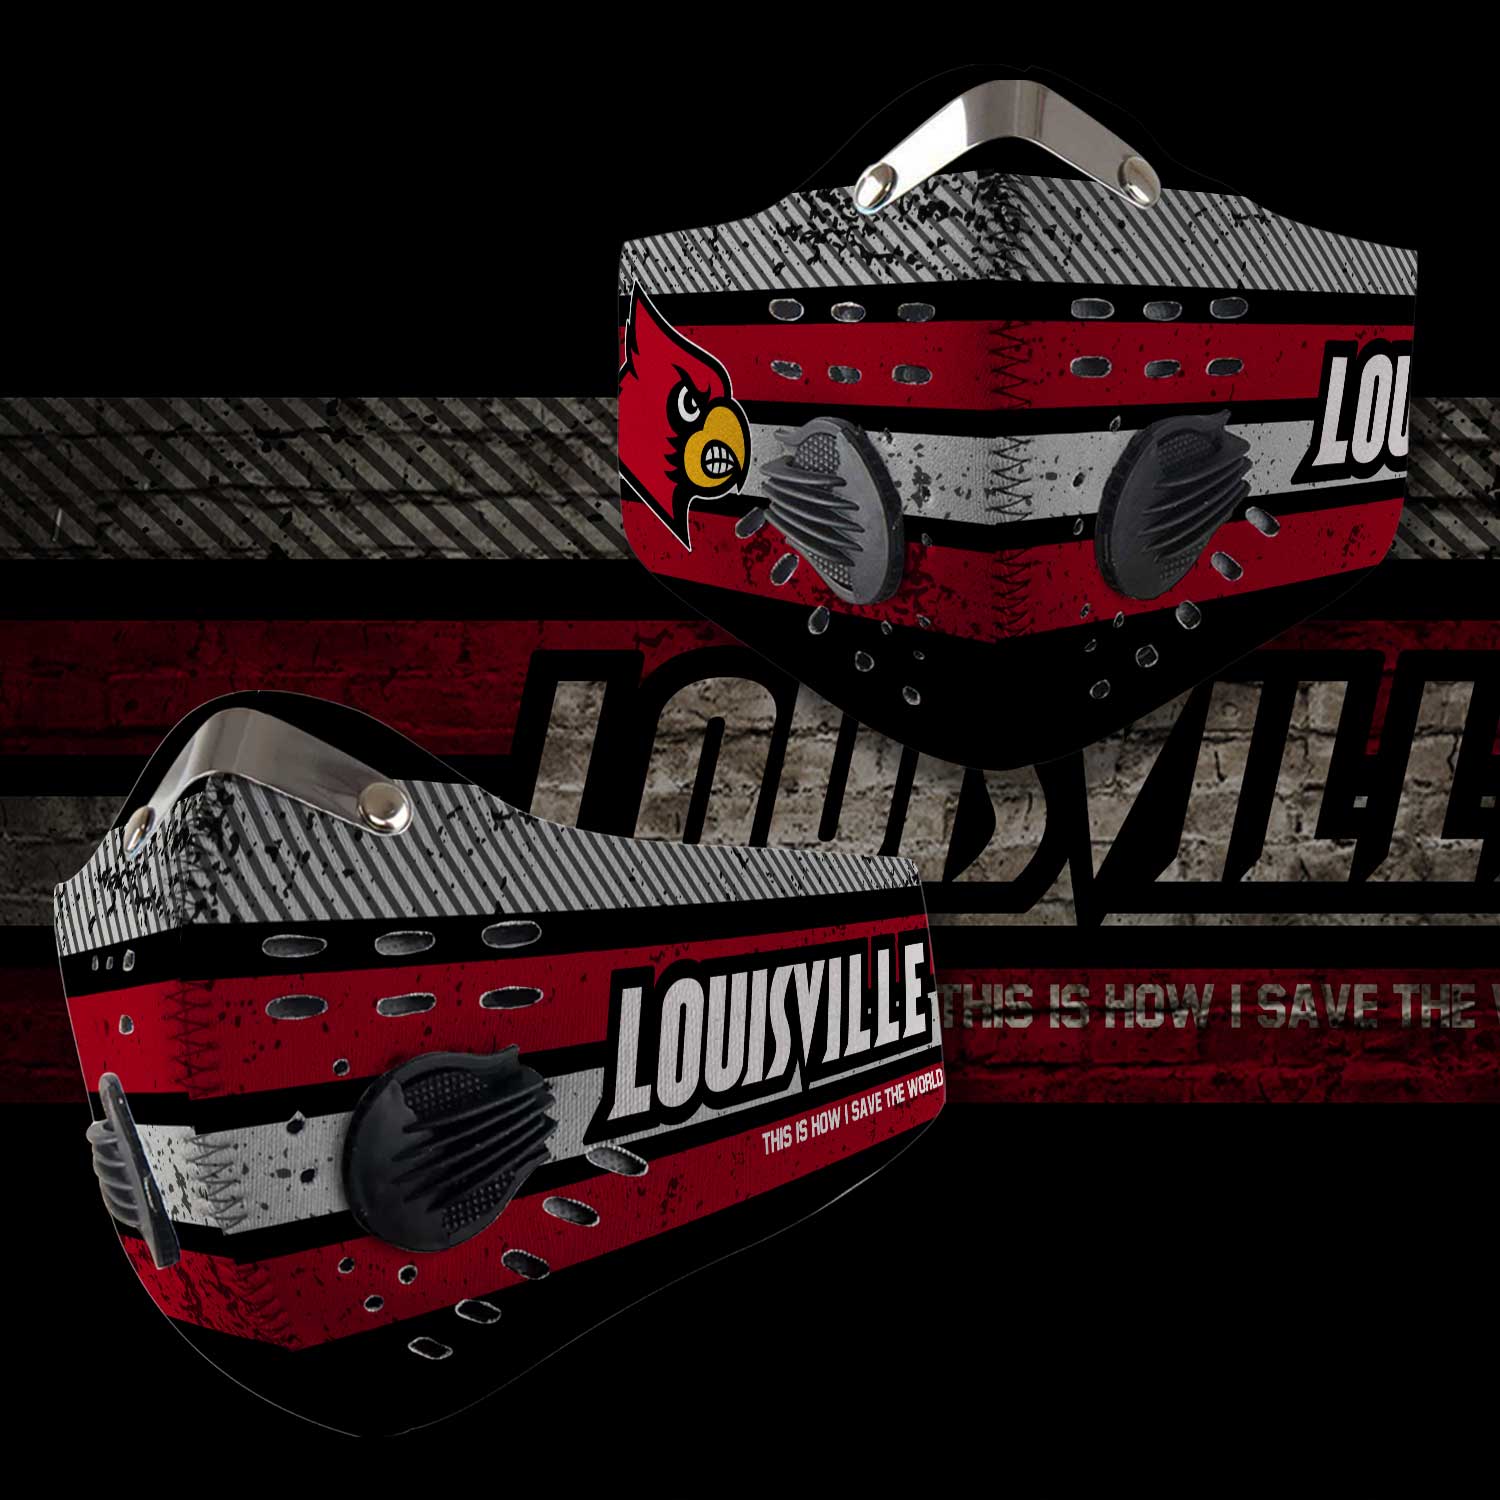 Louisville cardinals this is how i save the world carbon filter face mask